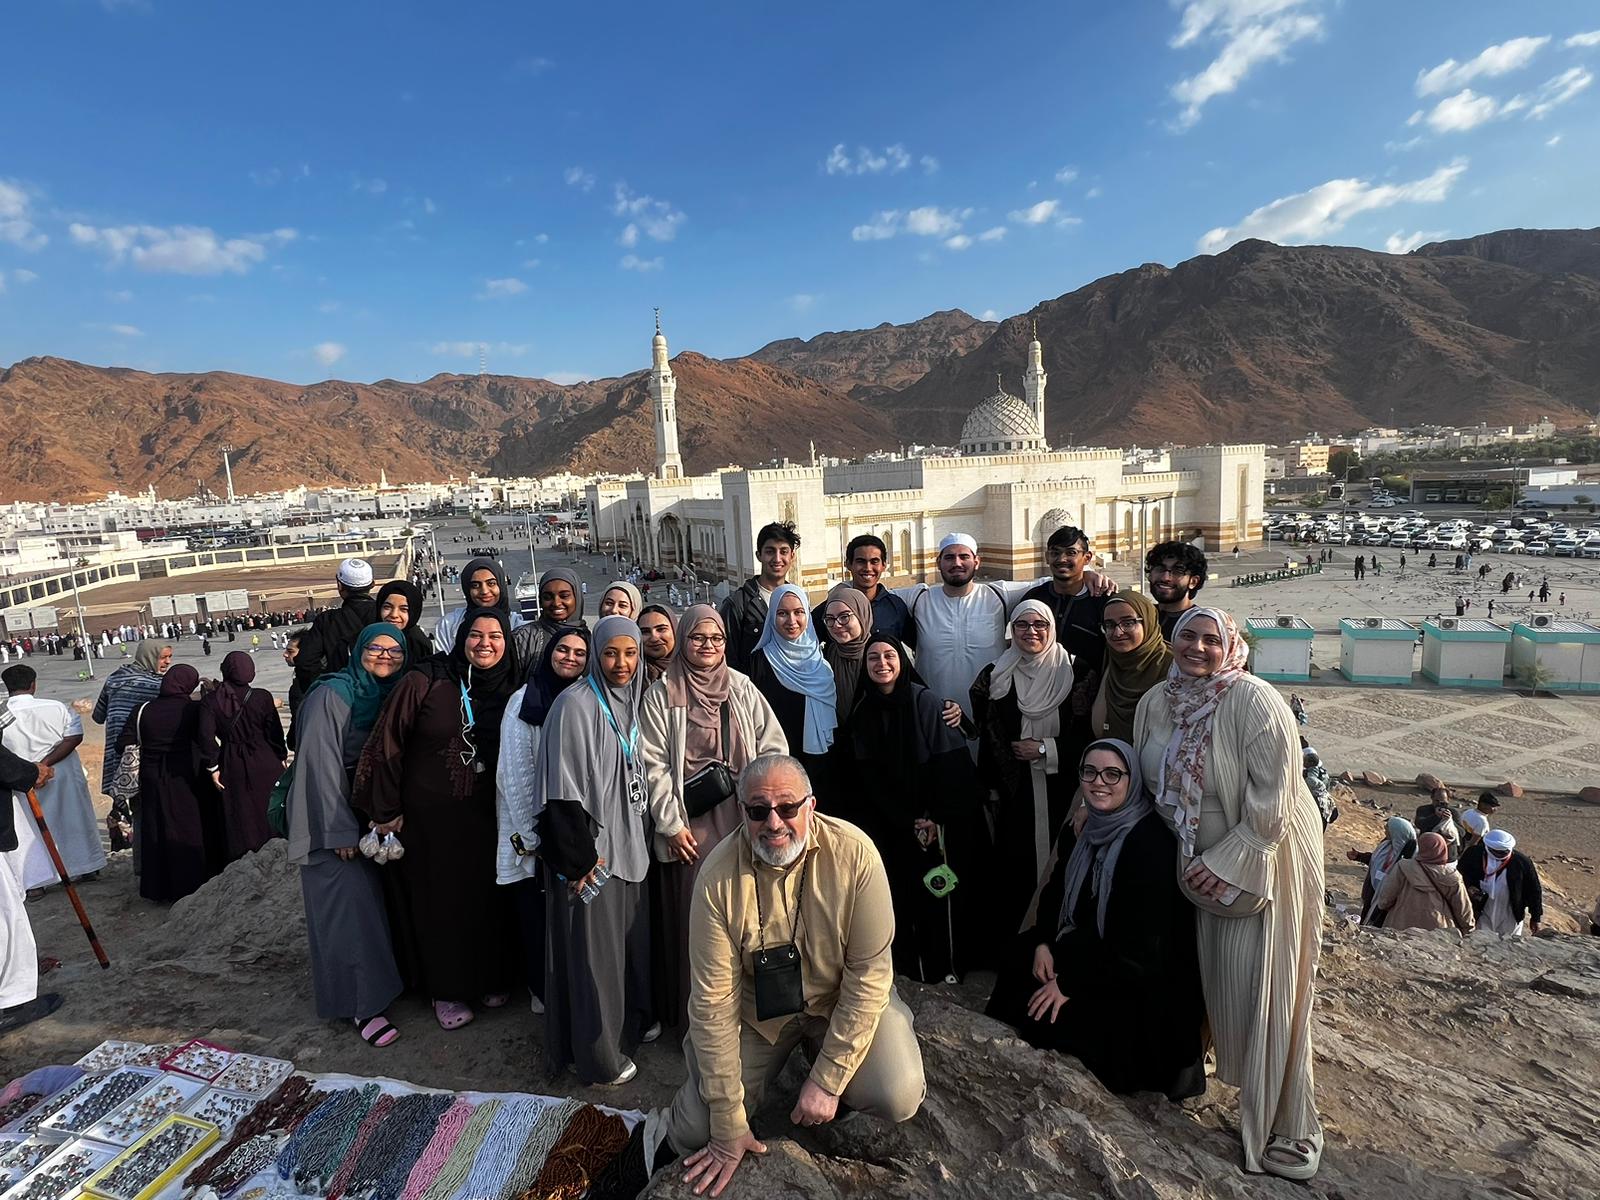 Group photo in front of the Sayed Al-Shuhada Mosque.